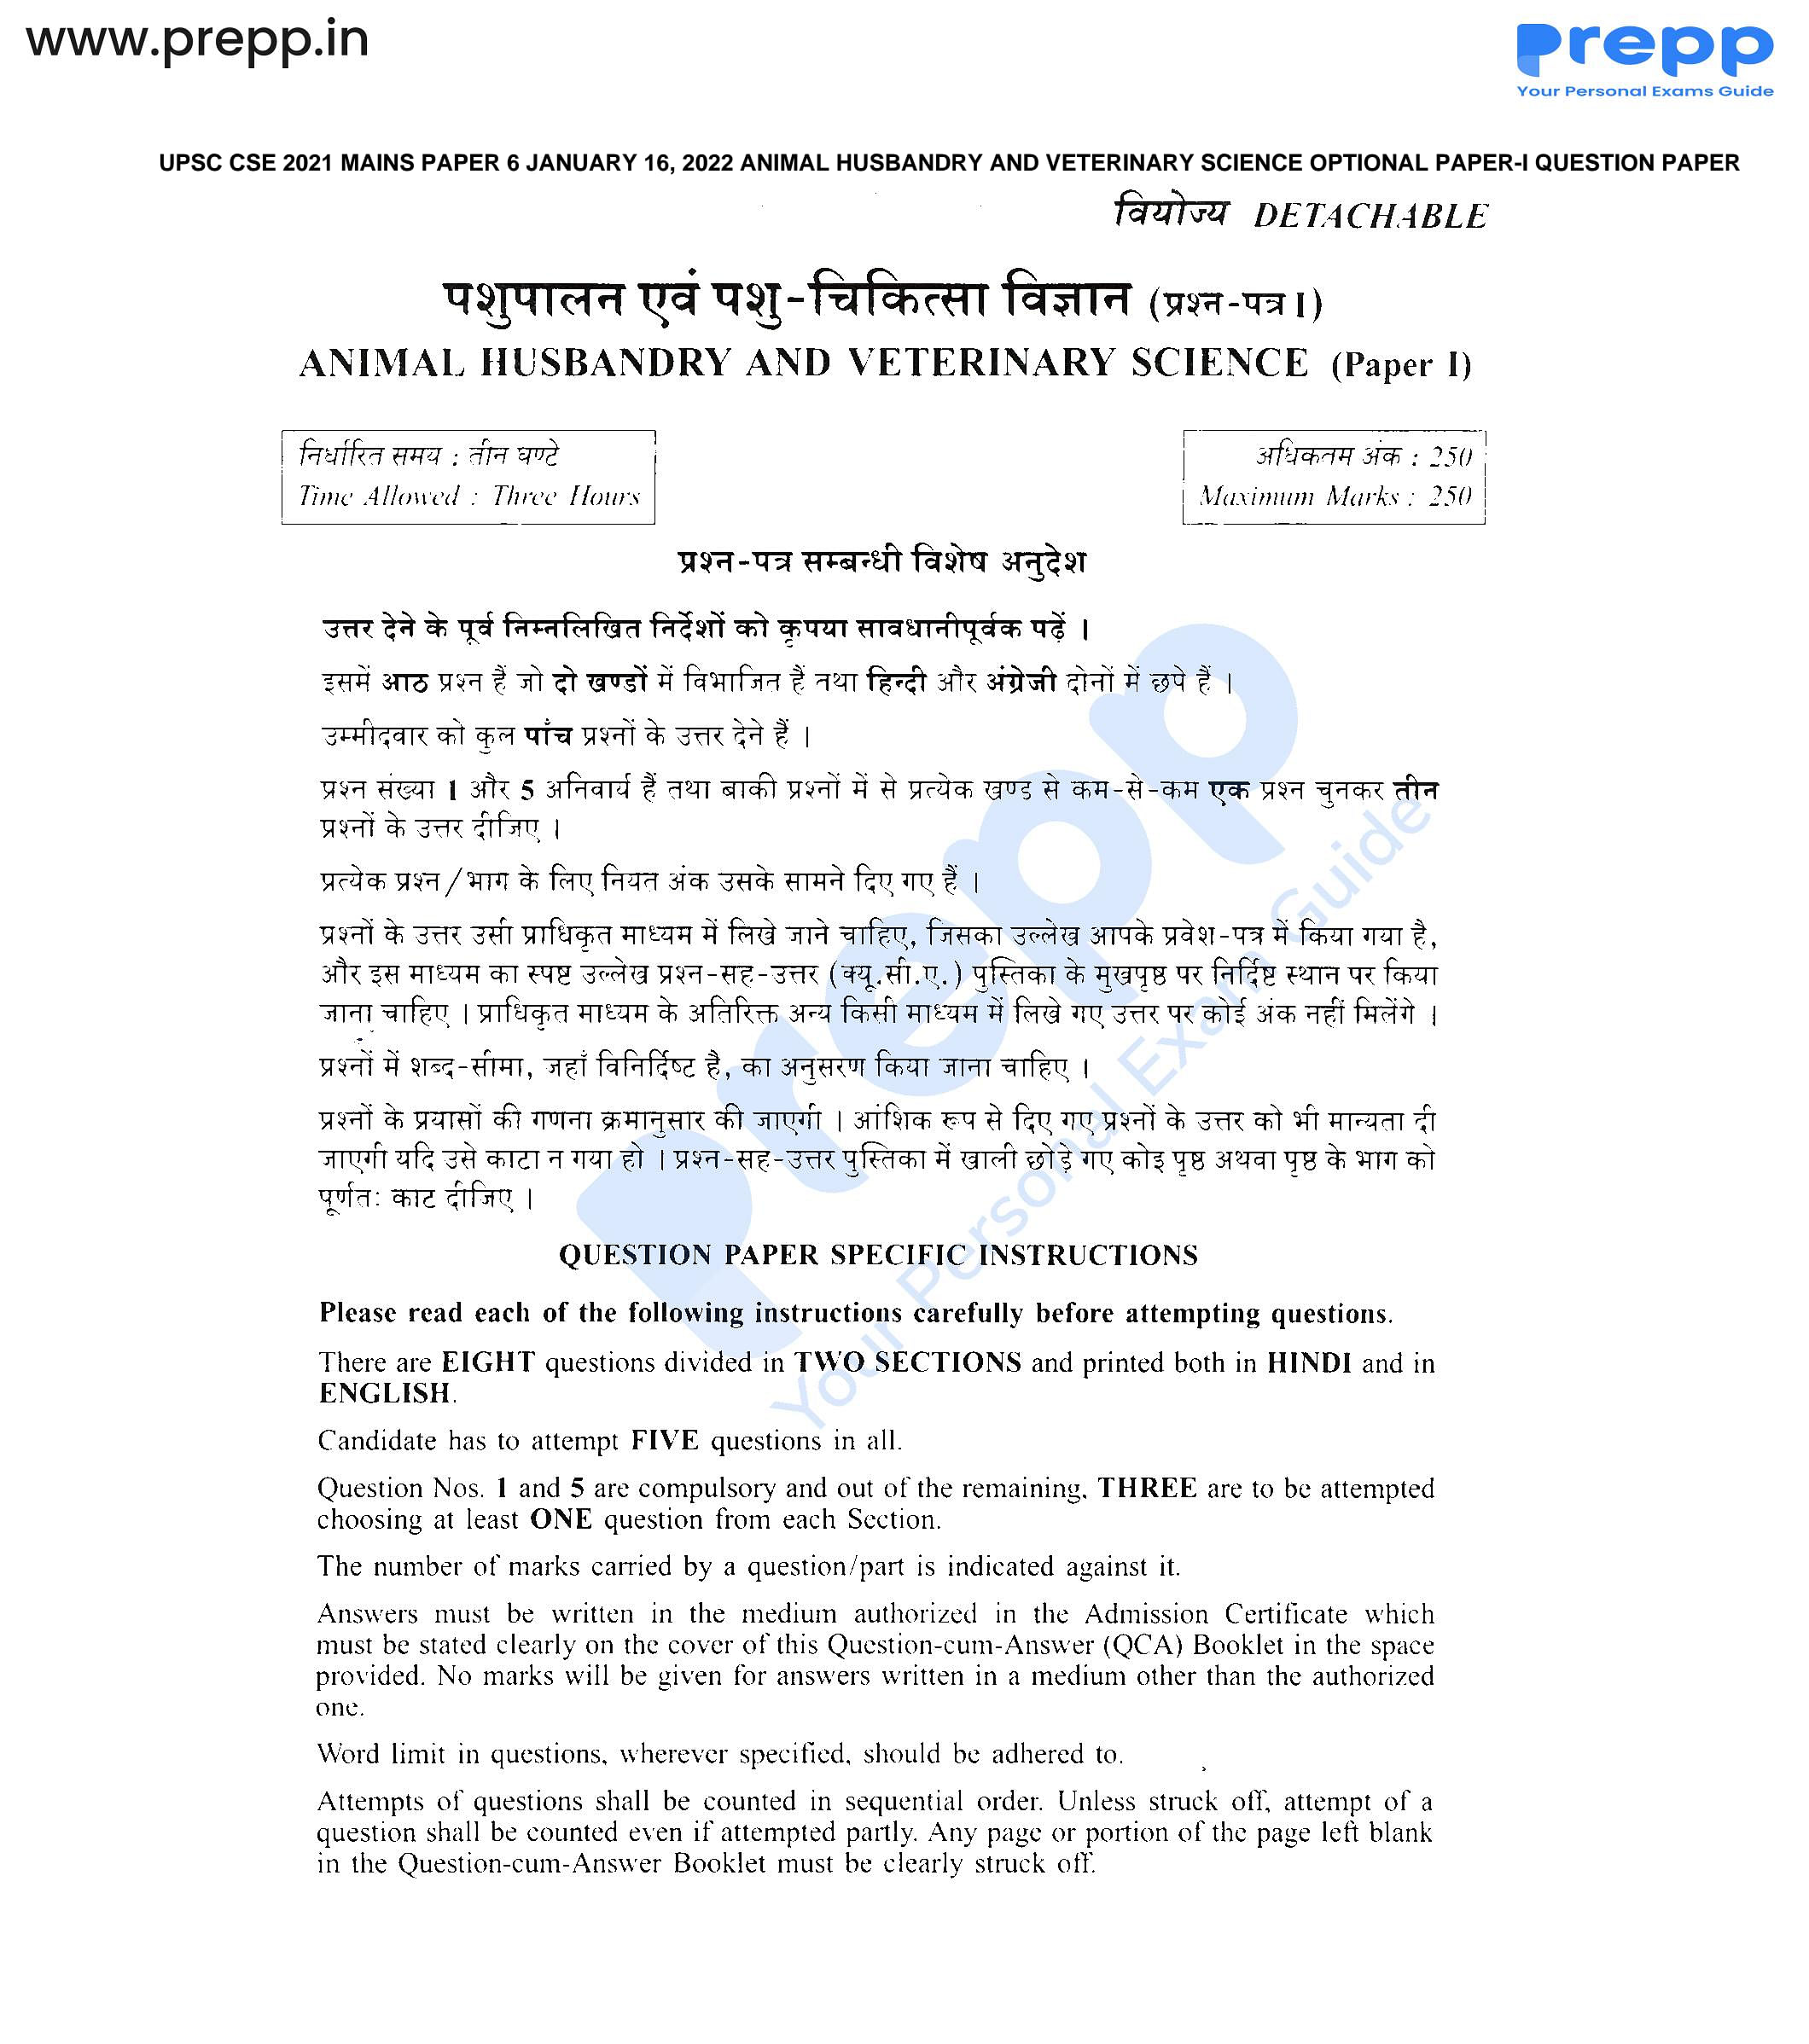 UPSC Mains 2021 Question Paper 6 for Animal Husbandry and Veterinary  Science Optional Paper-I